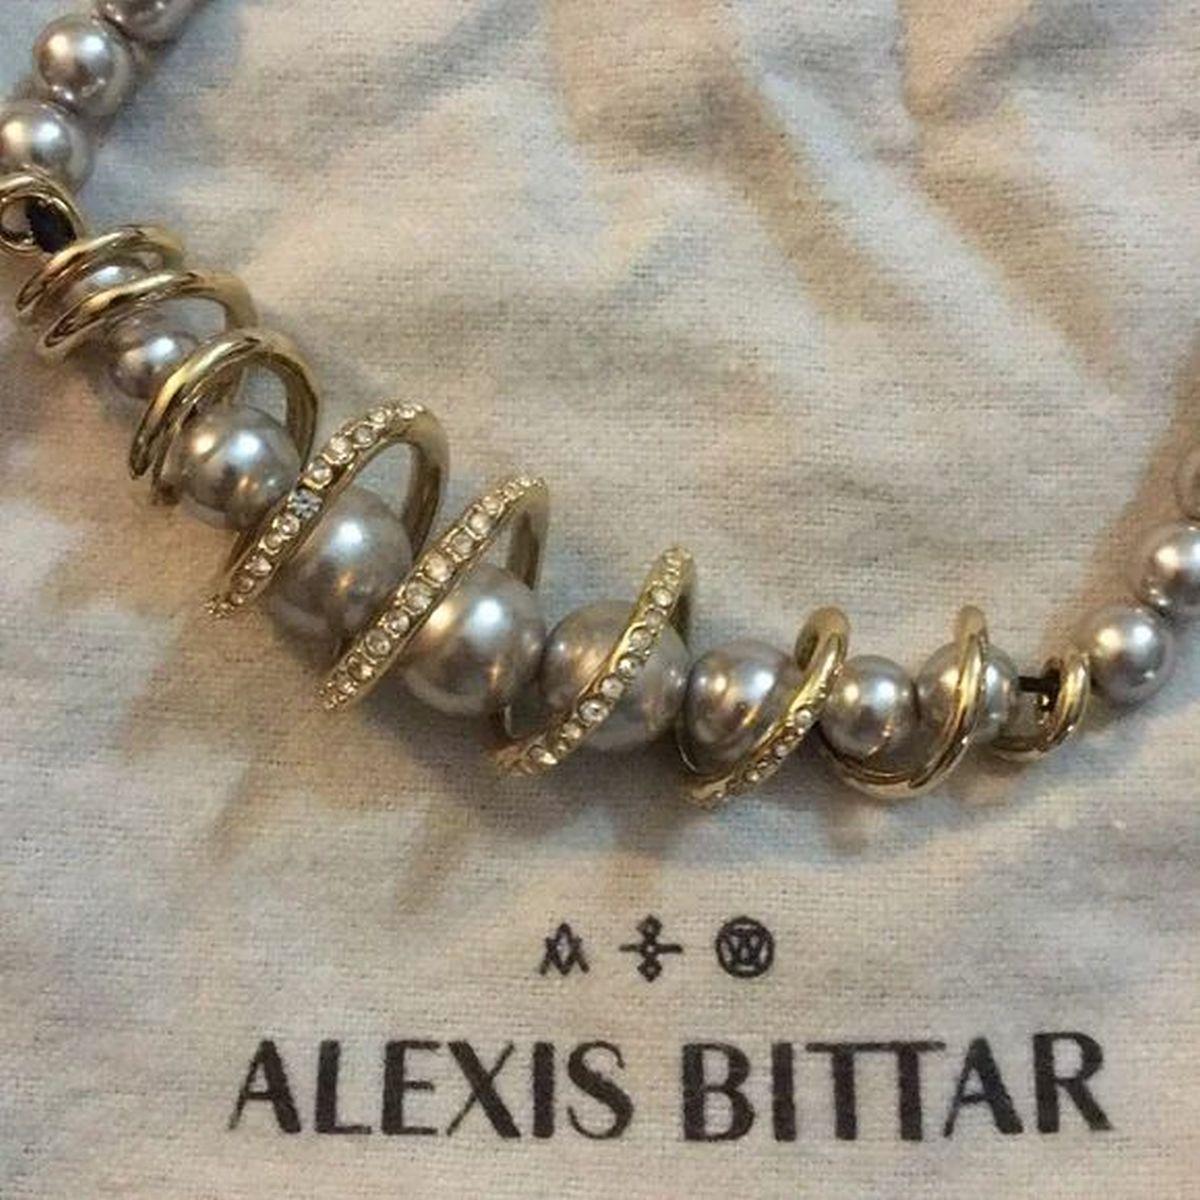 Simply Beautiful! Vintage Alexis Bittar Signed Designer Sparkling Swarovski Crystal Spiral Ring Gray Pearl Choker Necklace. Lobster claw clasp. Approx. 17” long, measured straight across. Alexis Bittar Storage Bag and Card included. Excellent